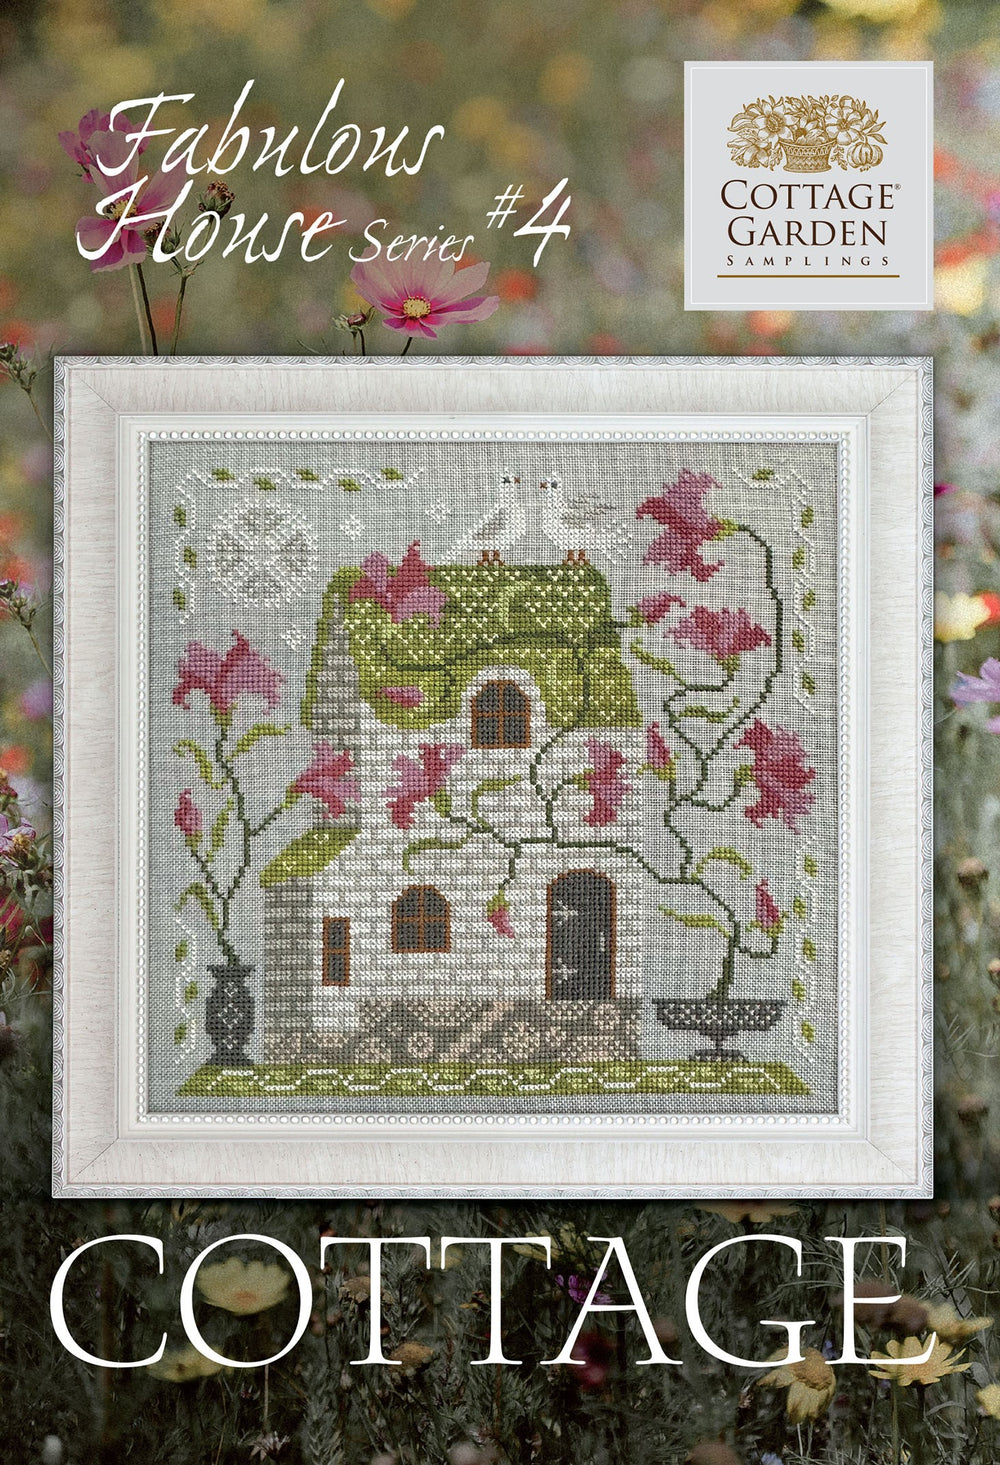 Cottage -  Fabulous House Series #4 by Cottage Garden Samplings